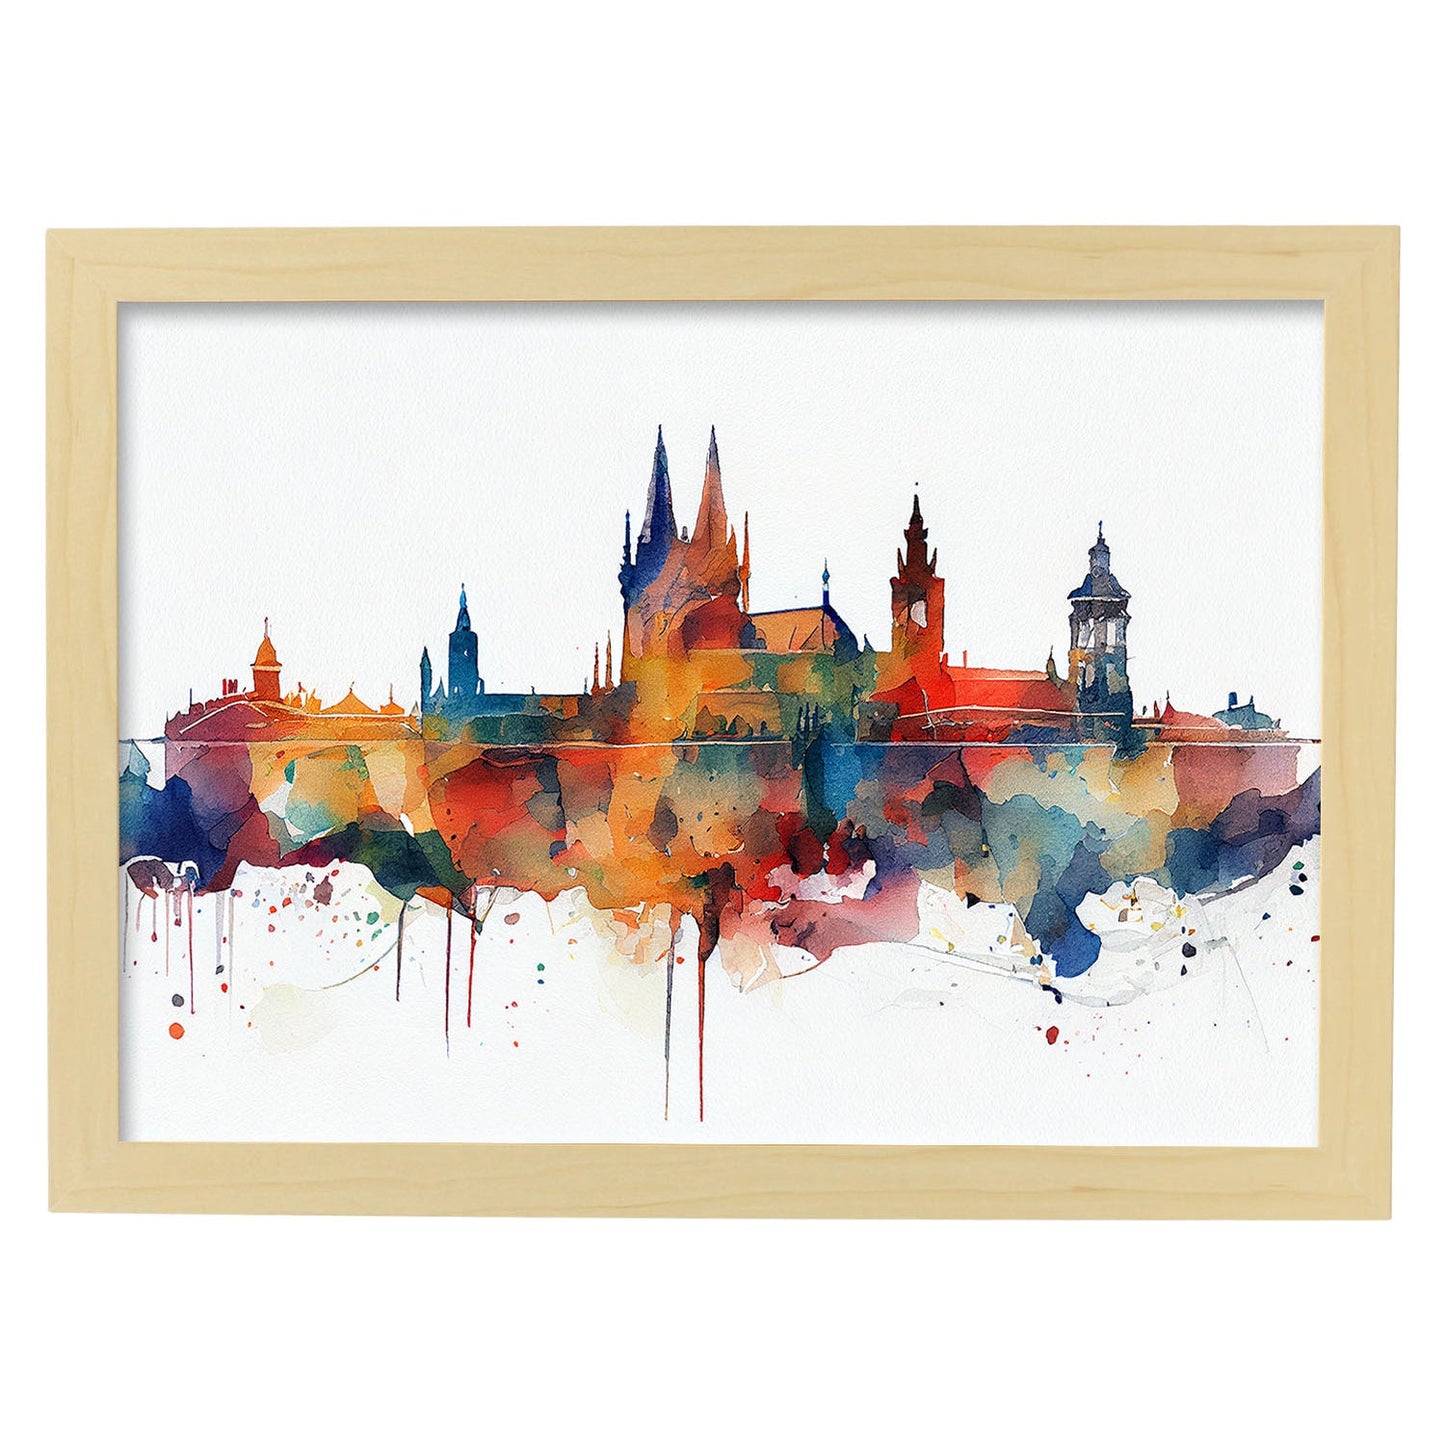 Nacnic watercolor of a skyline of the city of Prague_4. Aesthetic Wall Art Prints for Bedroom or Living Room Design.-Artwork-Nacnic-A4-Marco Madera Clara-Nacnic Estudio SL